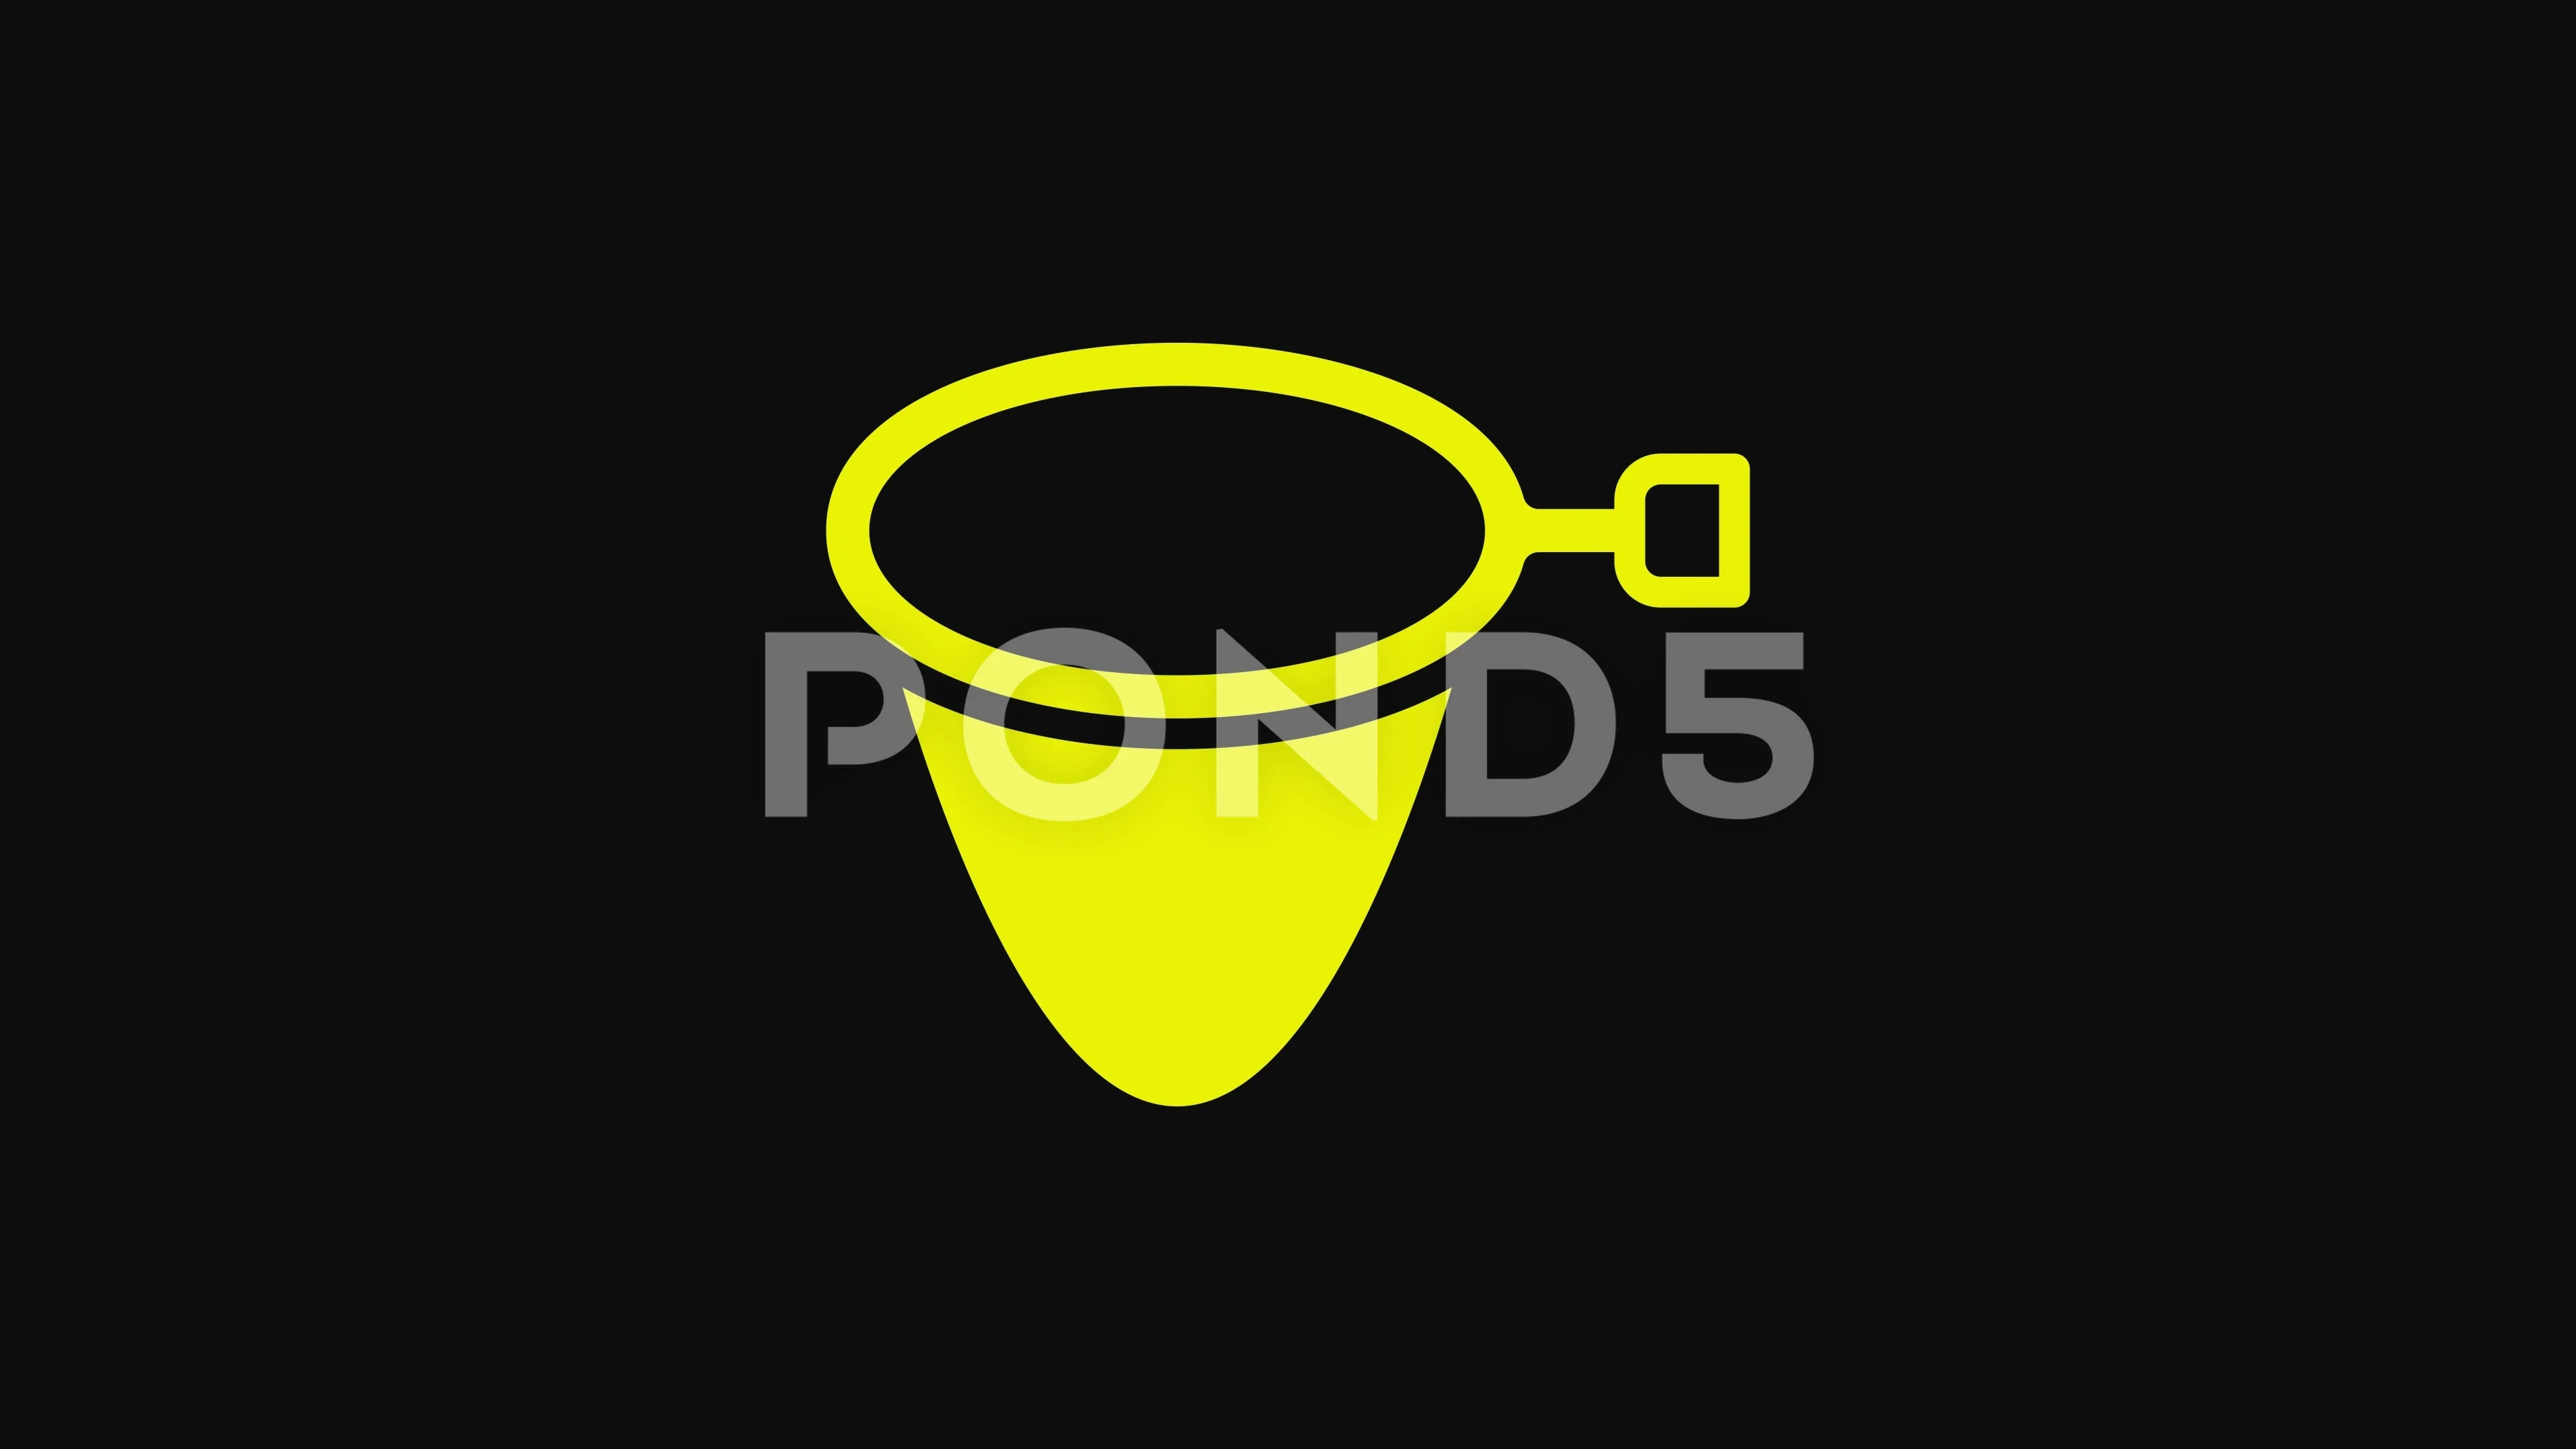 https://images.pond5.com/yellow-fishing-net-icon-isolated-footage-233064538_prevstill.jpeg